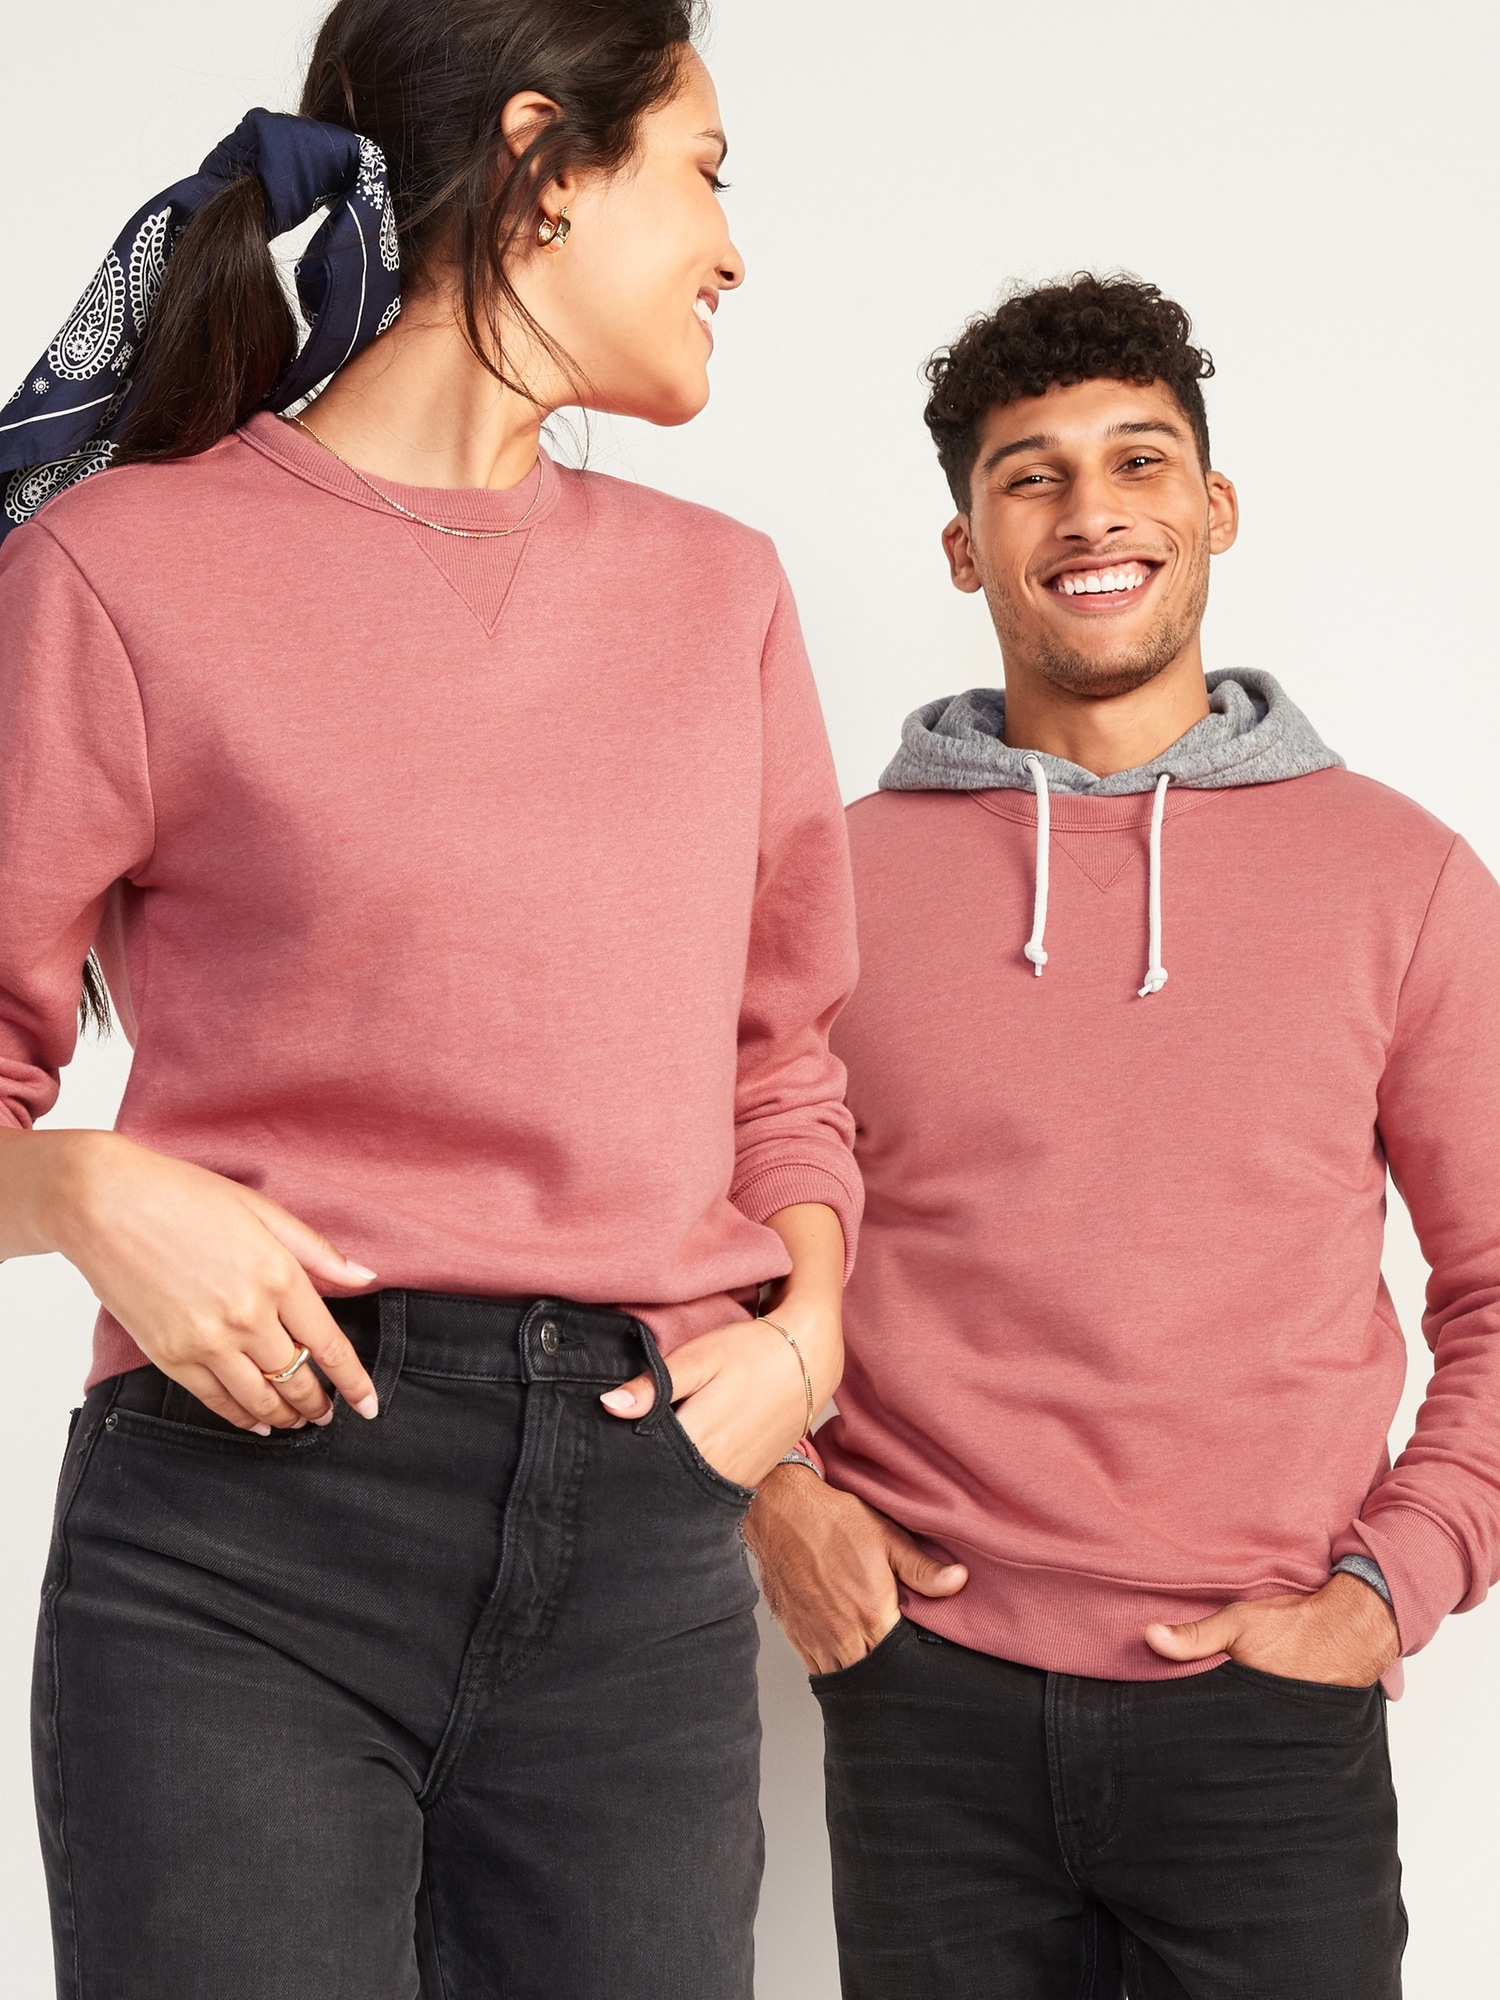 Soft-Washed Gender-Neutral Sweatshirt for Adults | Old Navy